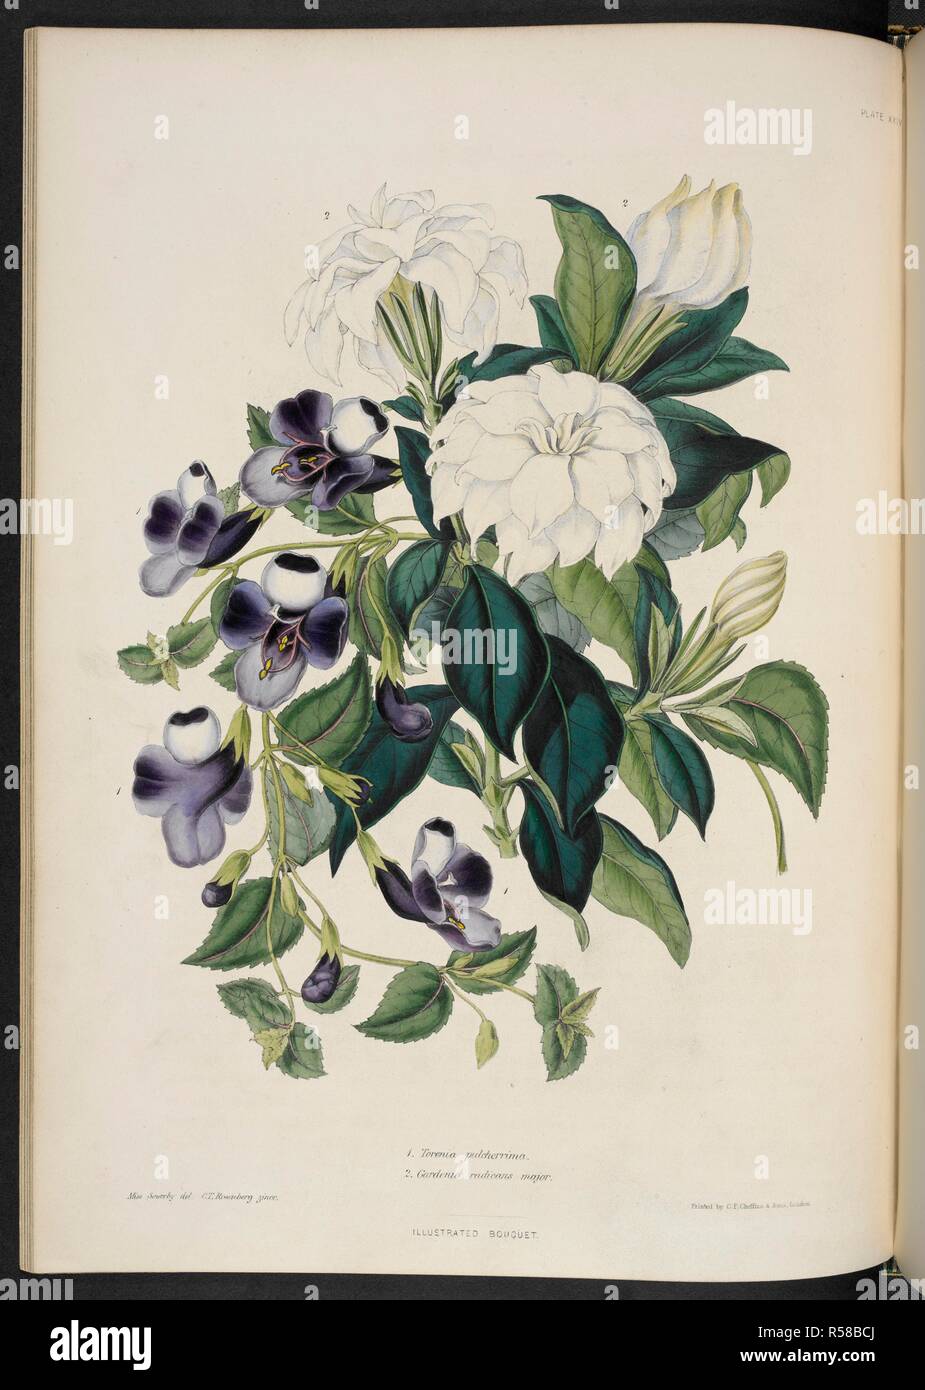 Torenia pulcherrima / Gardenia radicans major Torenia pulcherrima. (Fig.1) Gardenia radicans major.(Fig.2) . The Illustrated Bouquet, consisting of figures, with descriptions of new flowers. London, 1857-64. Source: 1823.c.13 plate 24. Author: Henderson, Edward George. Sowerby, Miss. Stock Photo